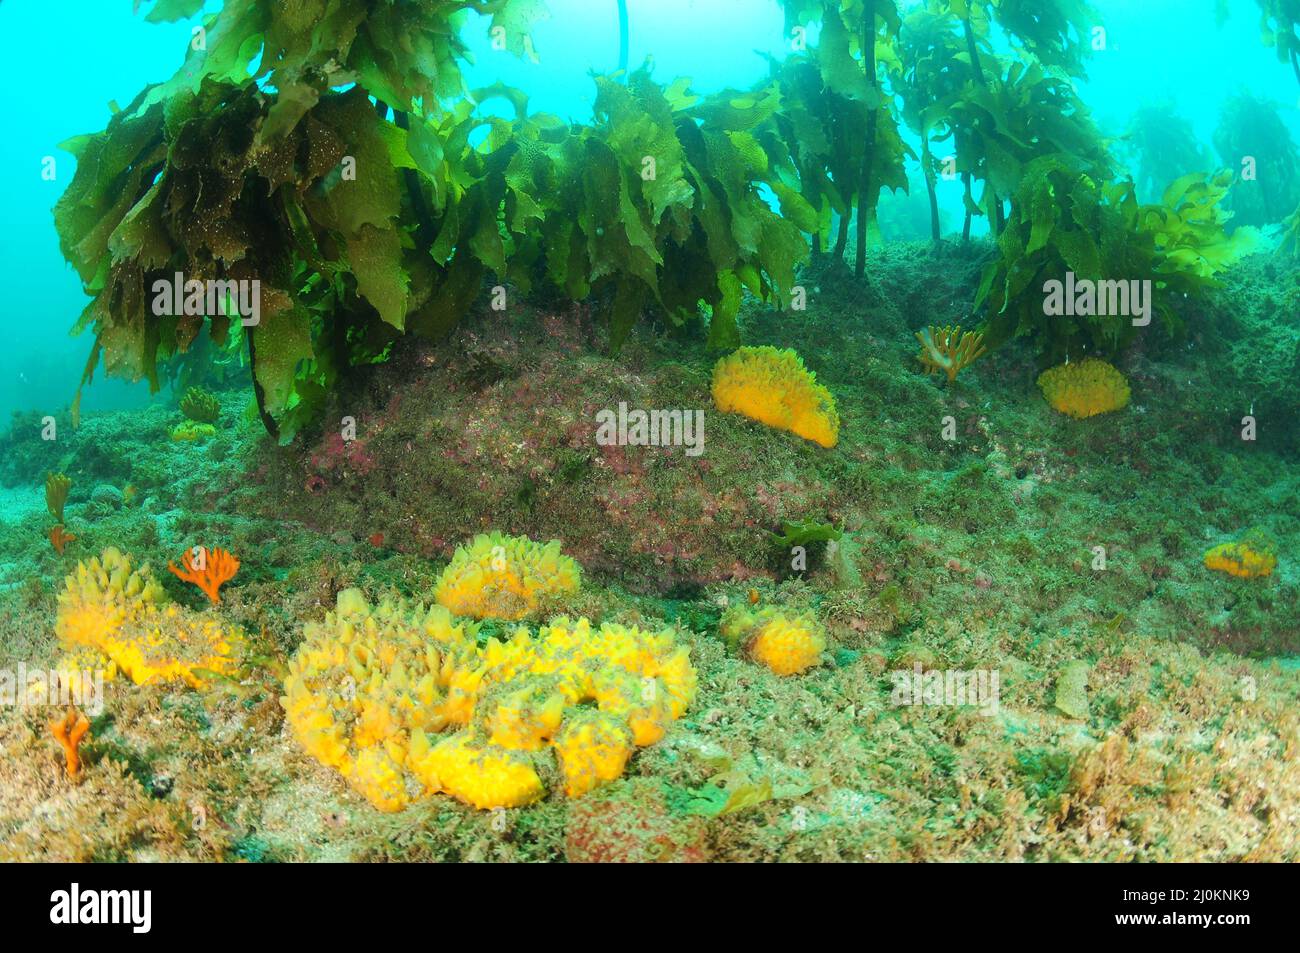 Colourful sponge garden on rocky reef covered with brown kelp Ecklonia radiata. Location: Leigh New Zealand Stock Photo